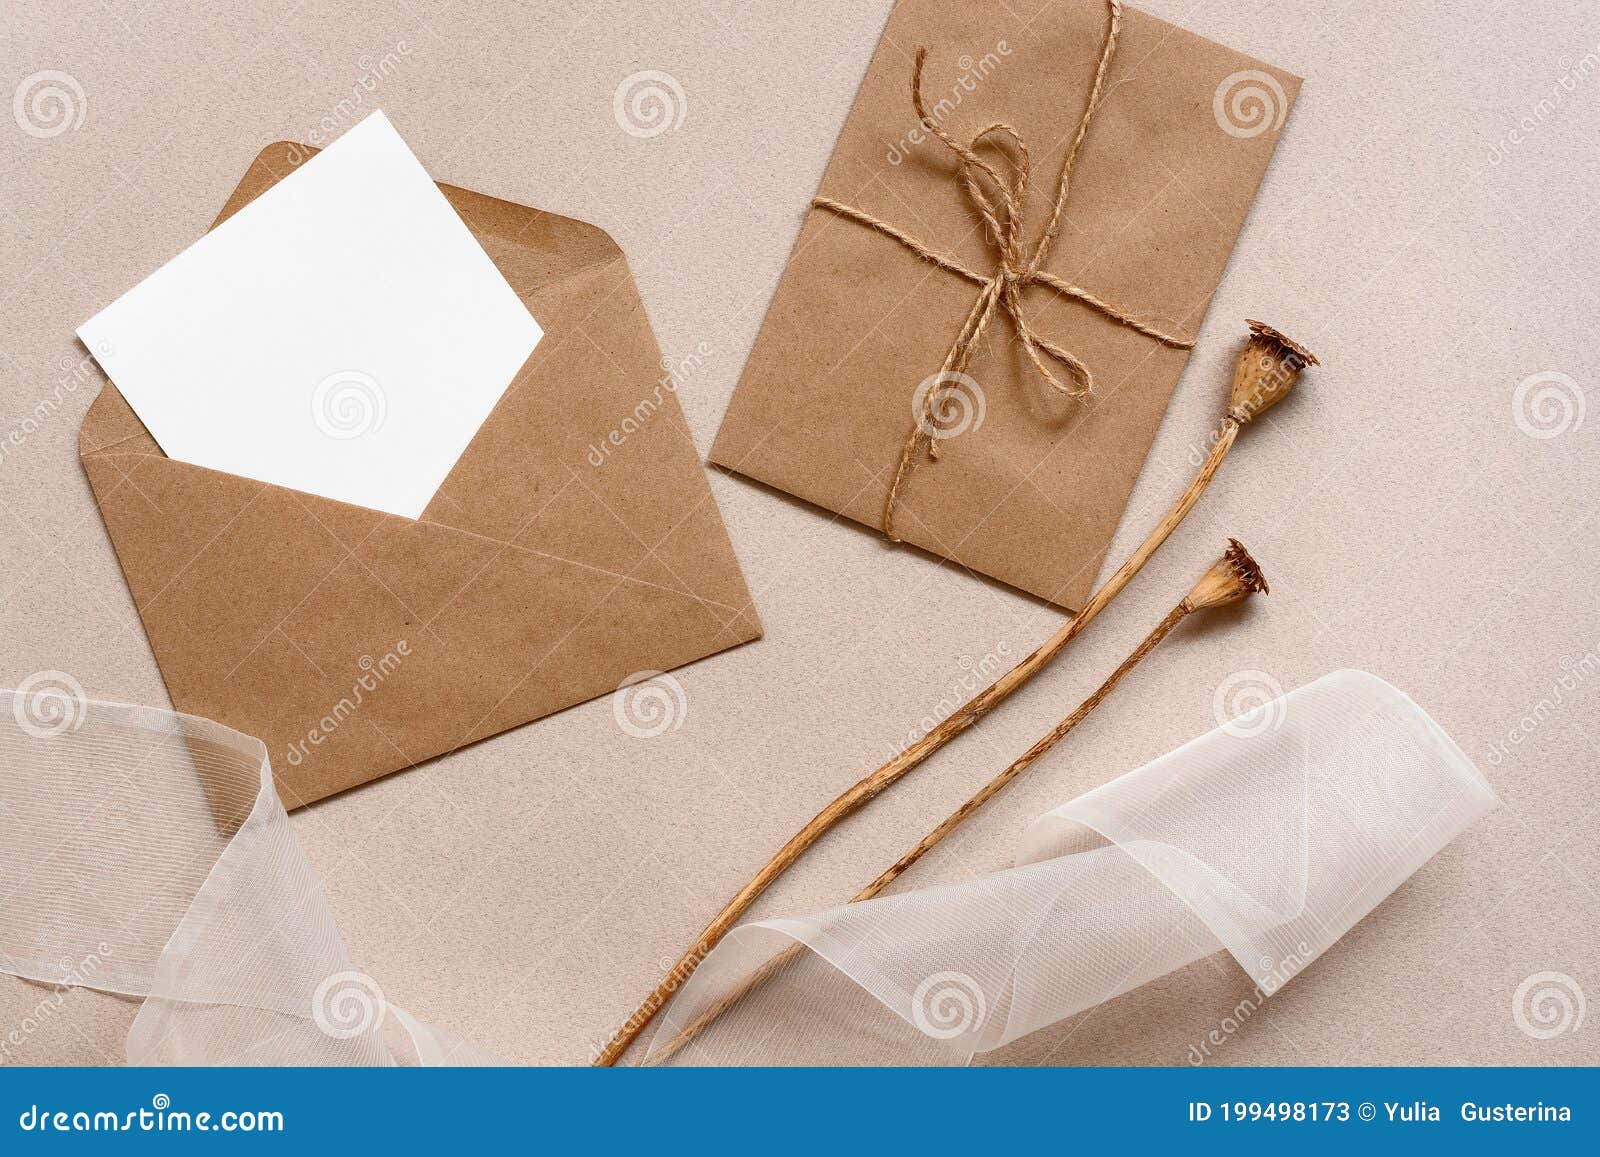 Download Blank Card Mockup In Craft Envelope Silk Ribbon And Dry Poppy Boxes On Brown Paper Background Feminine Wedding Invitation Stock Image Image Of Company Creative 199498173